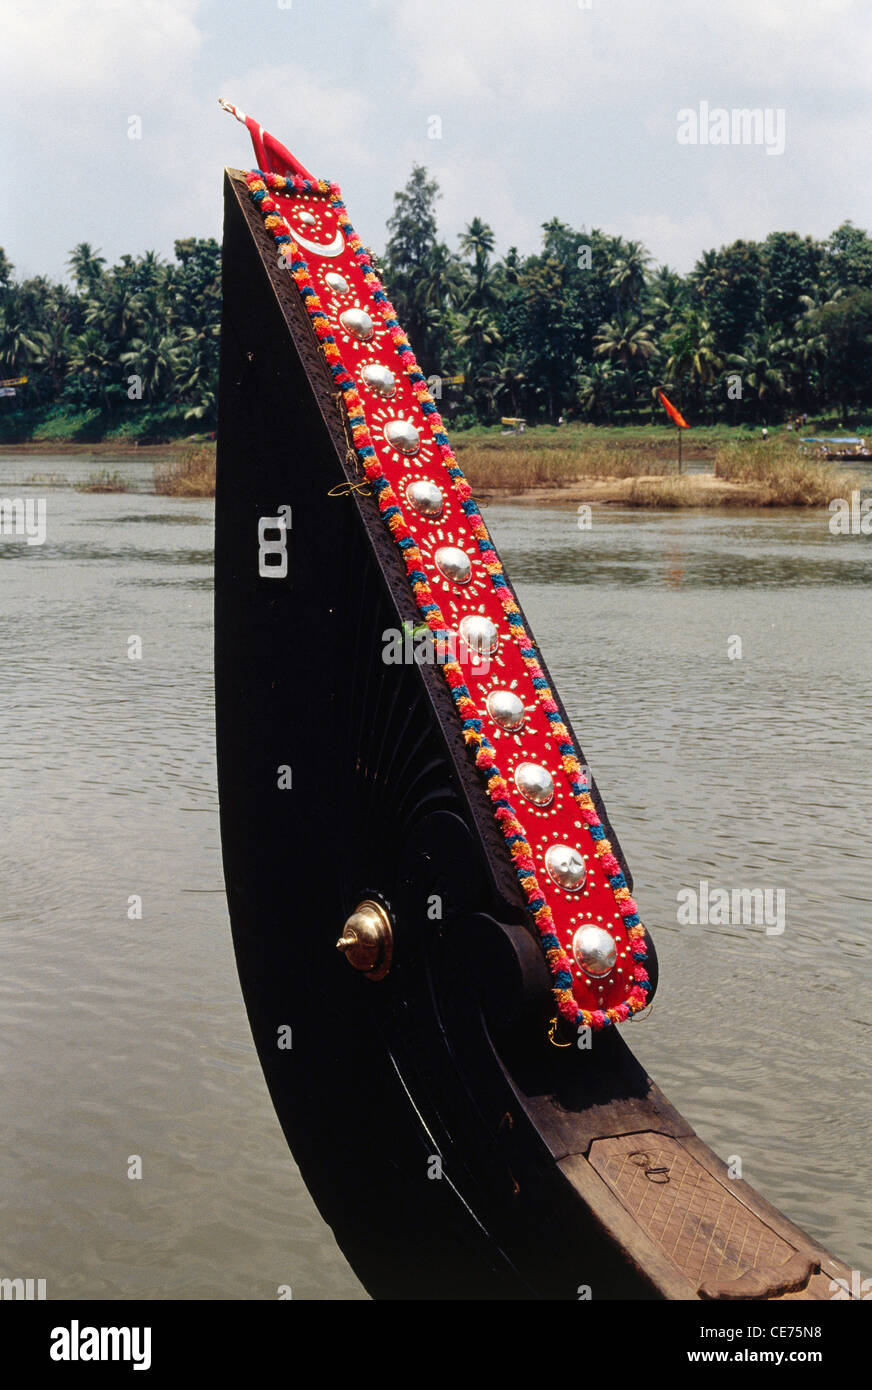 Amaram tail part of the indian snake boat decorated studded with golden orbs and fringes kerala india asia Stock Photo